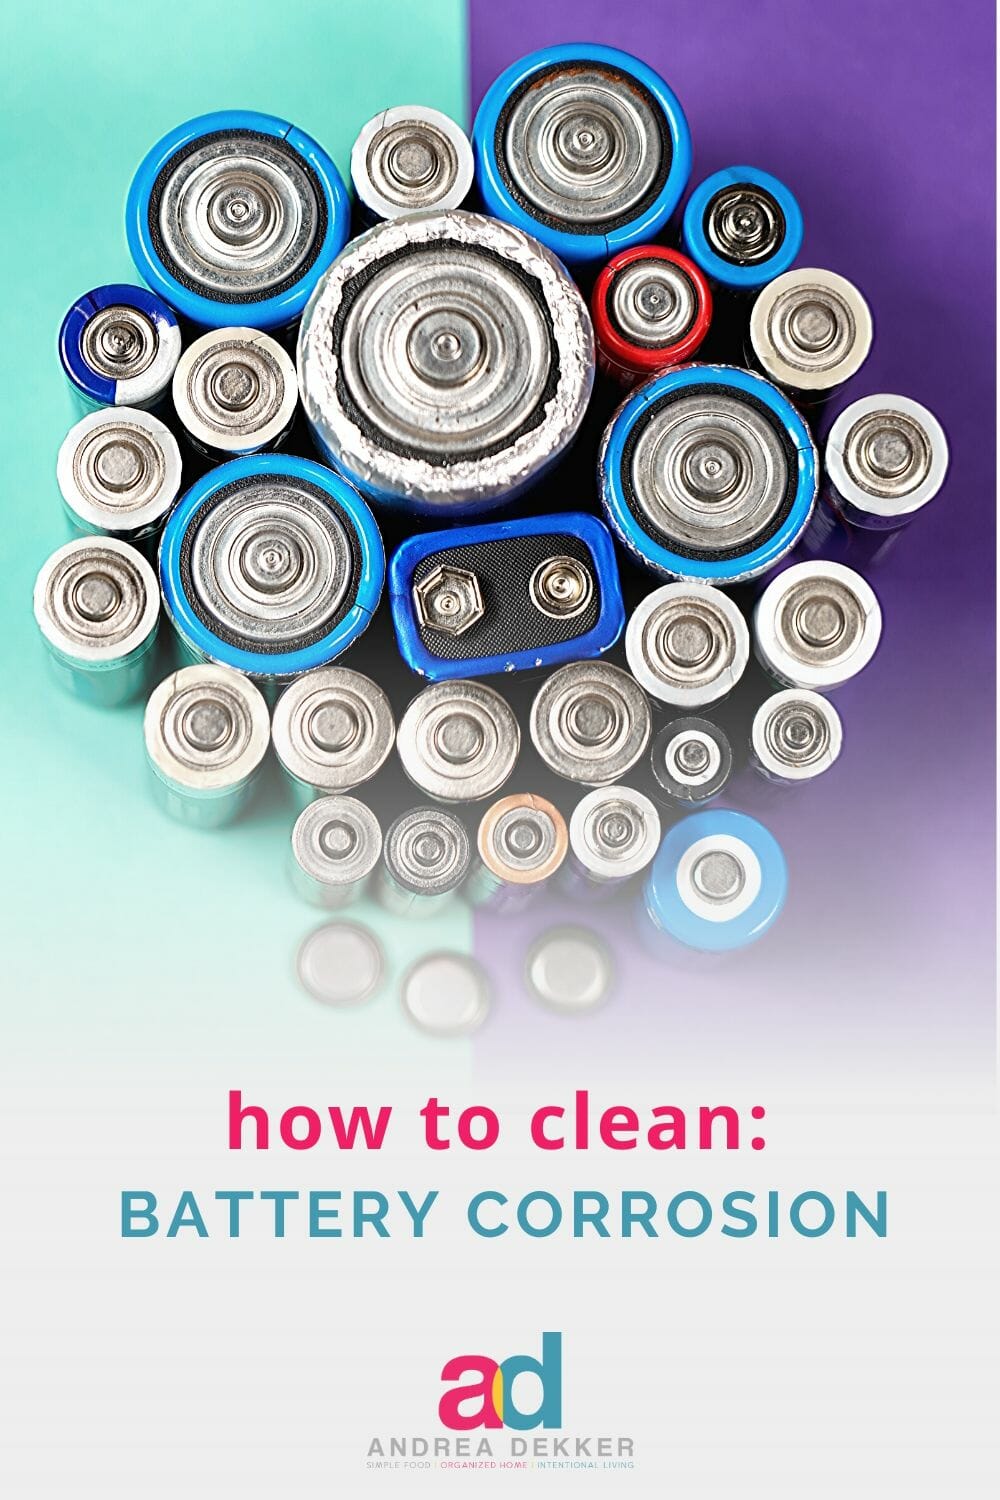 Learn how to clean battery corrosion in 6 simple steps. Your toys and electronics will work like new again! via @andreadekker